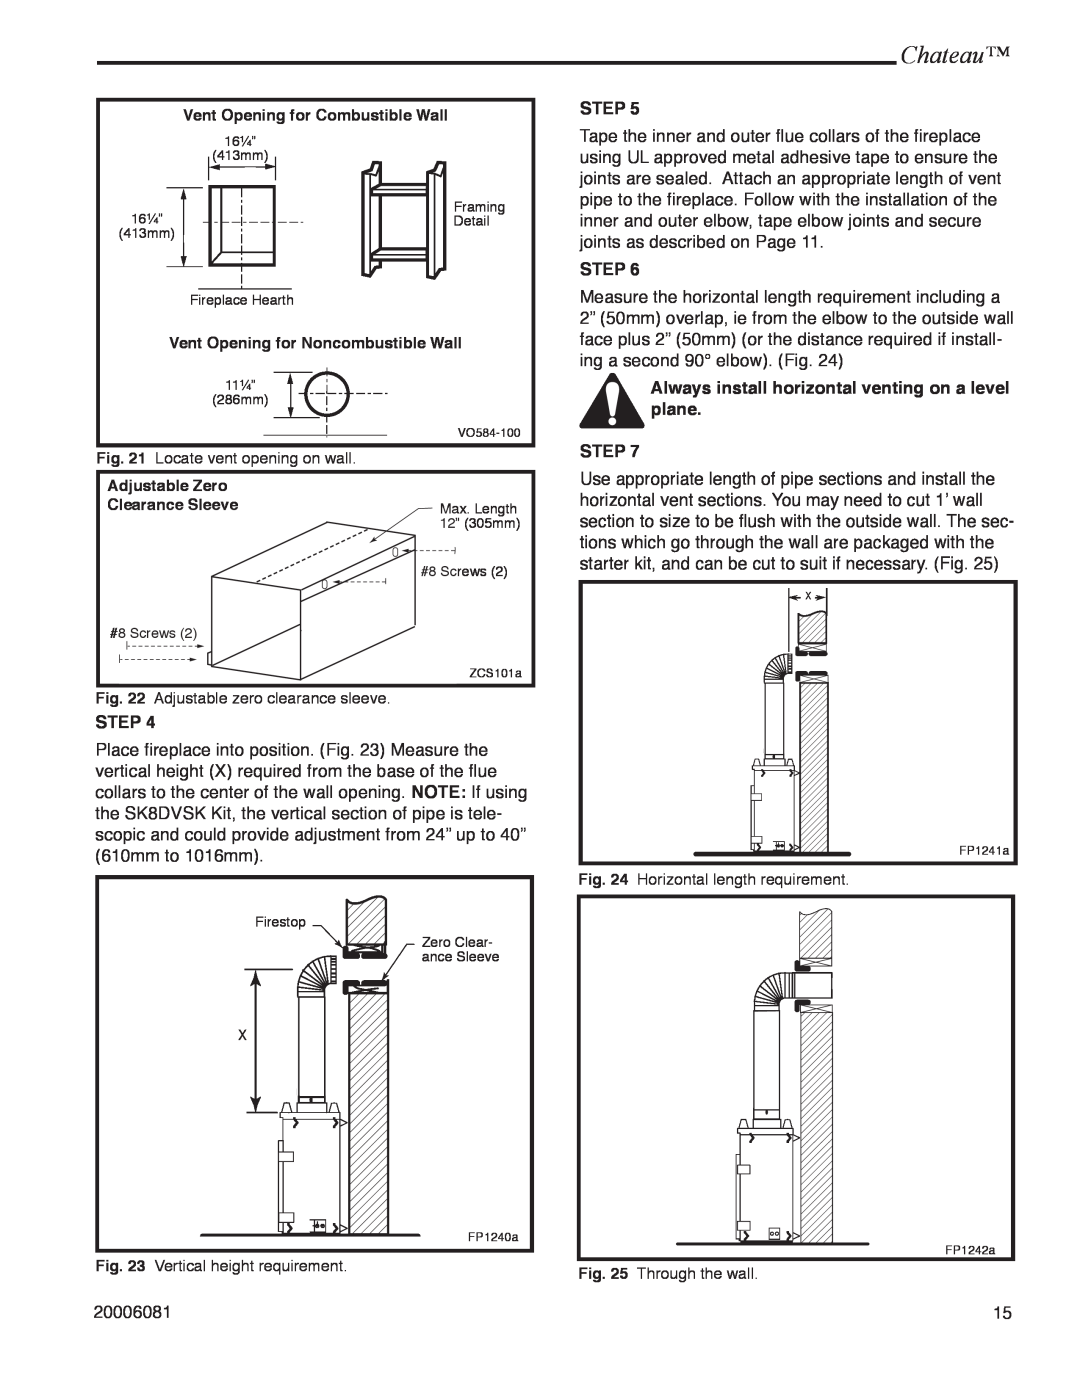 Vermont Casting DVT38 installation instructions Chateau, Step 